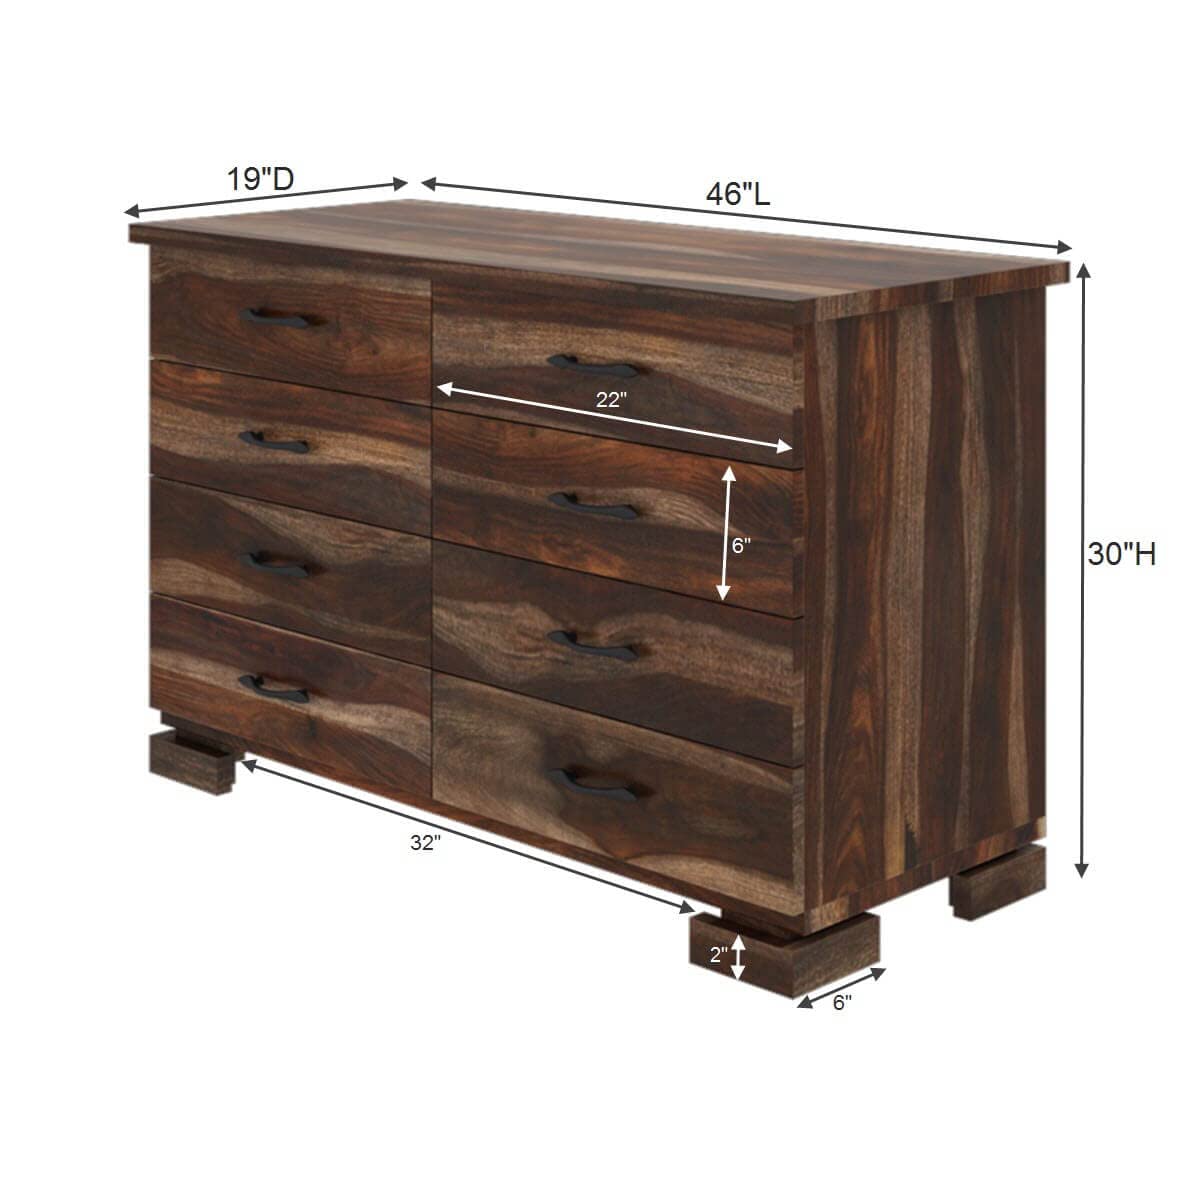 WoodMarwar Solid Sheesham Wood Chest of Drawer 8 Drawers Dresser for Home & Living Room